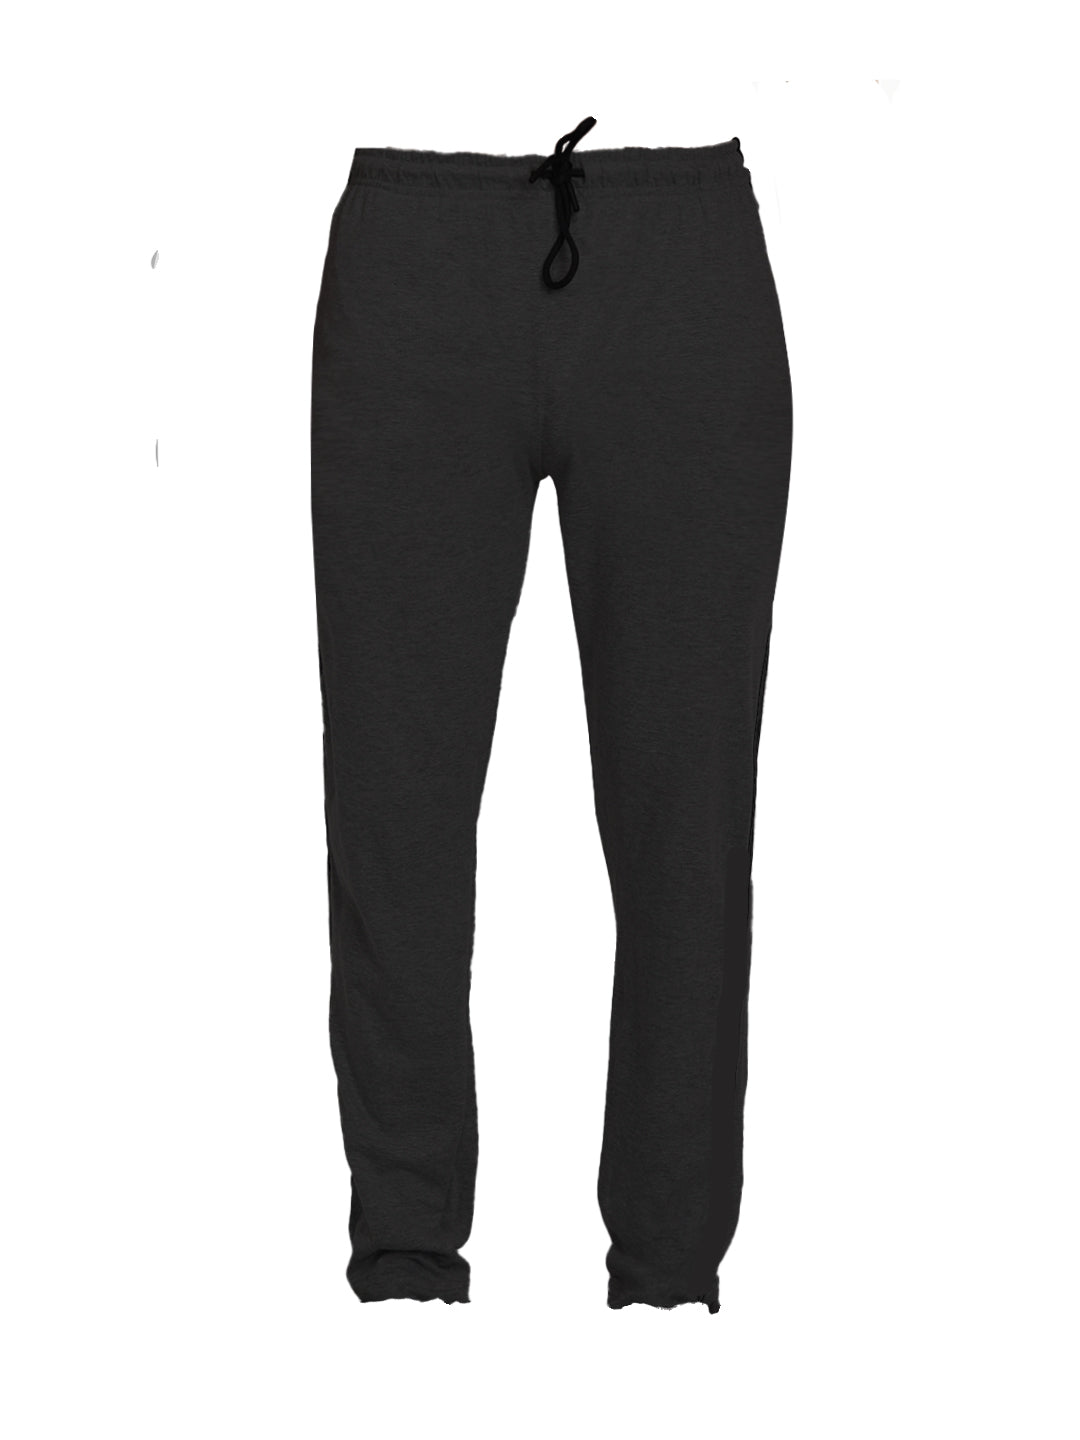 It's time to up your style statement with these track pants from Amazon